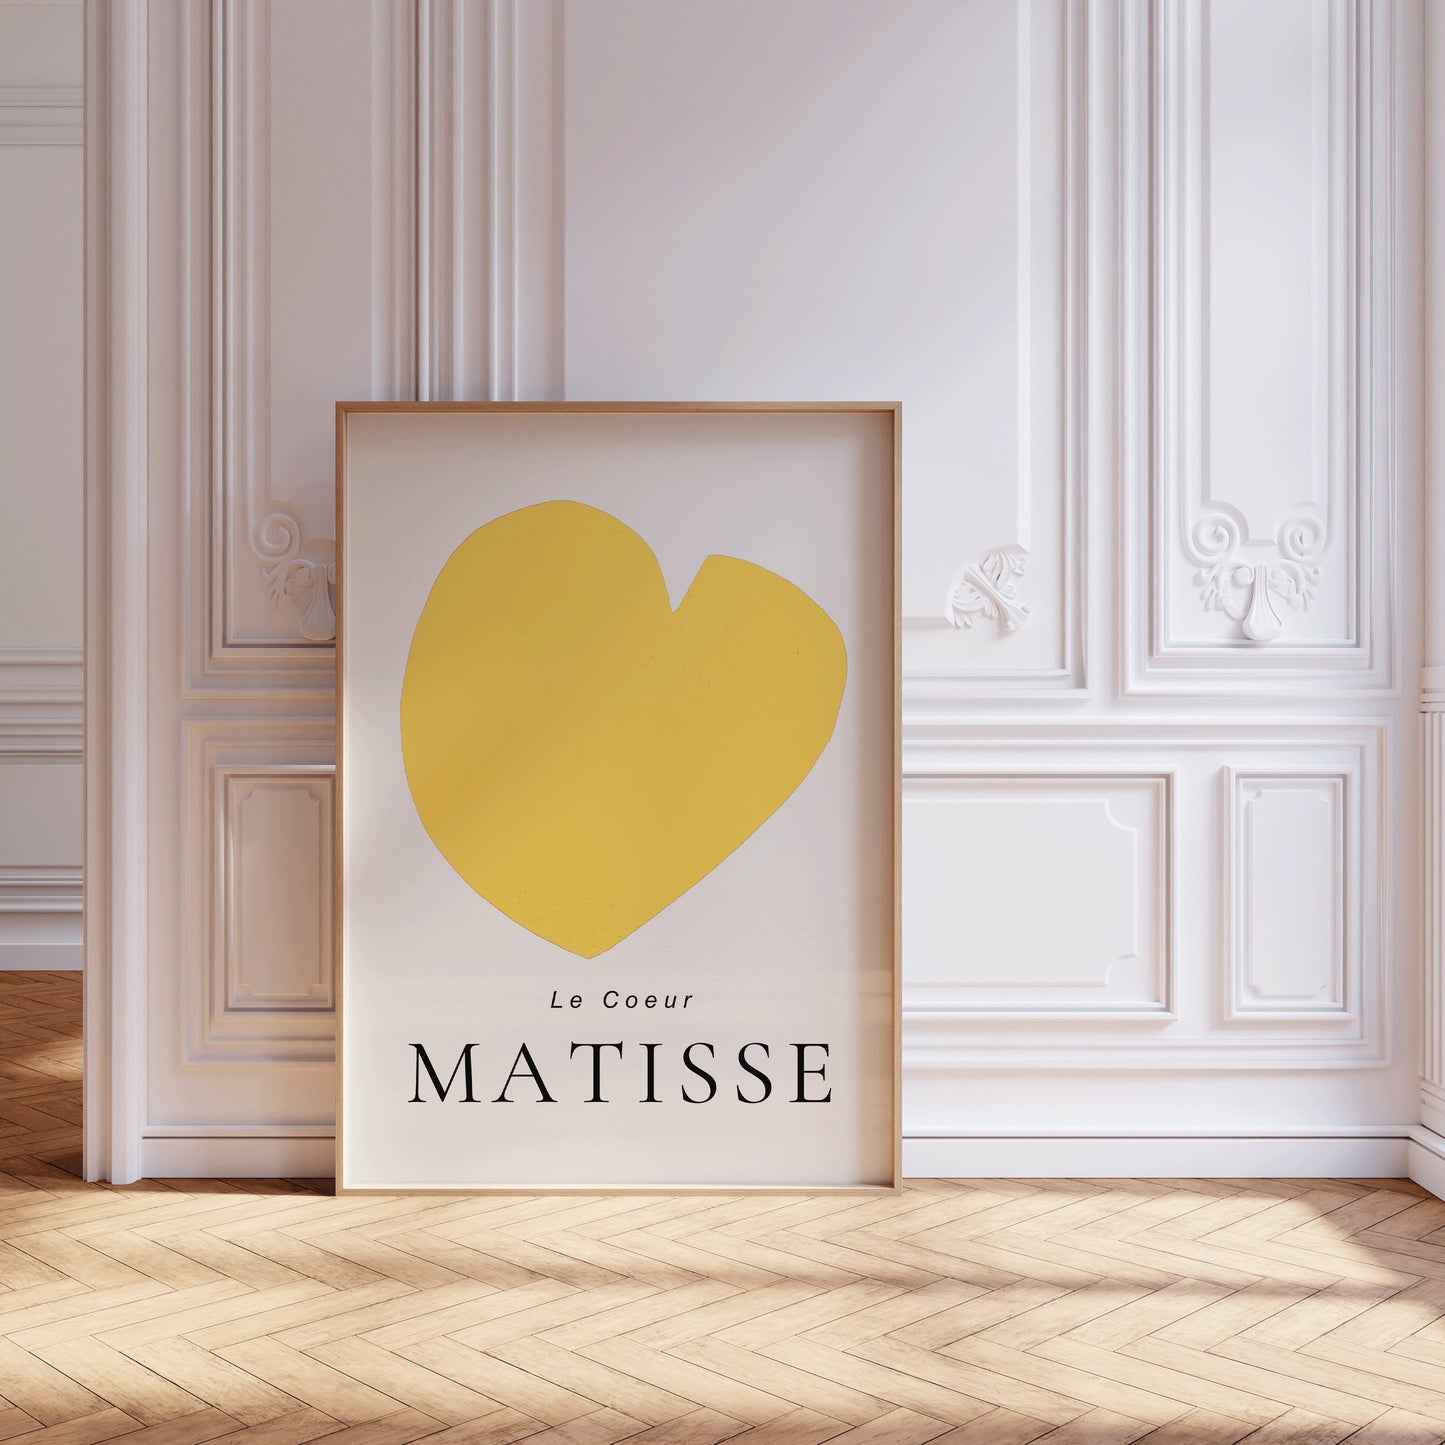 Framed Henri Matisse The Heart POSTER Black Yellow Famous Art Print Retro Museum Ready to Hang Home Office Decor Gift Berggruen and Cie